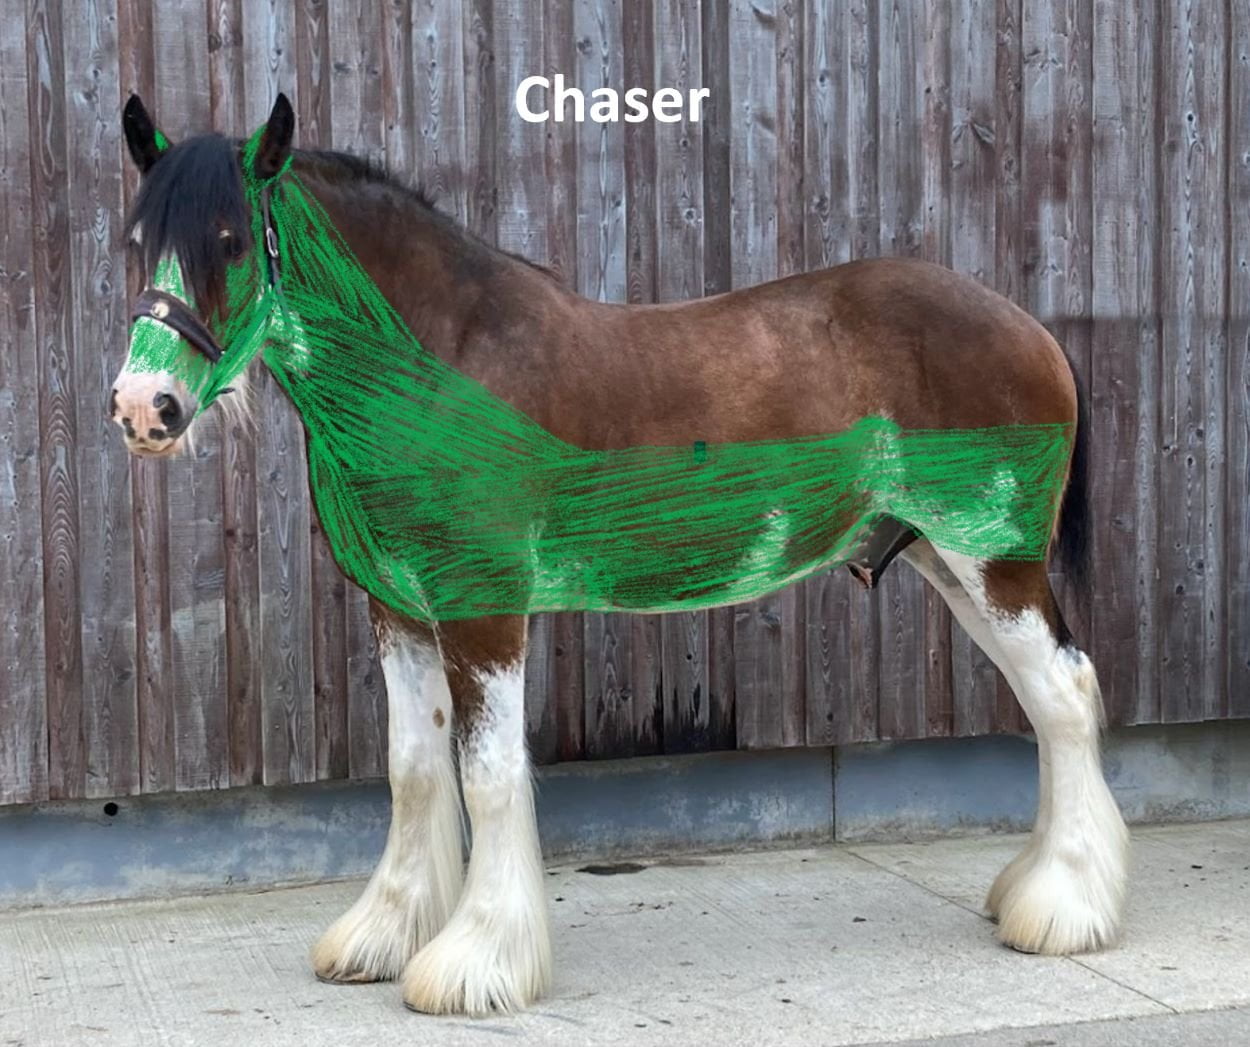 Clydesdale displaying a chaser clip